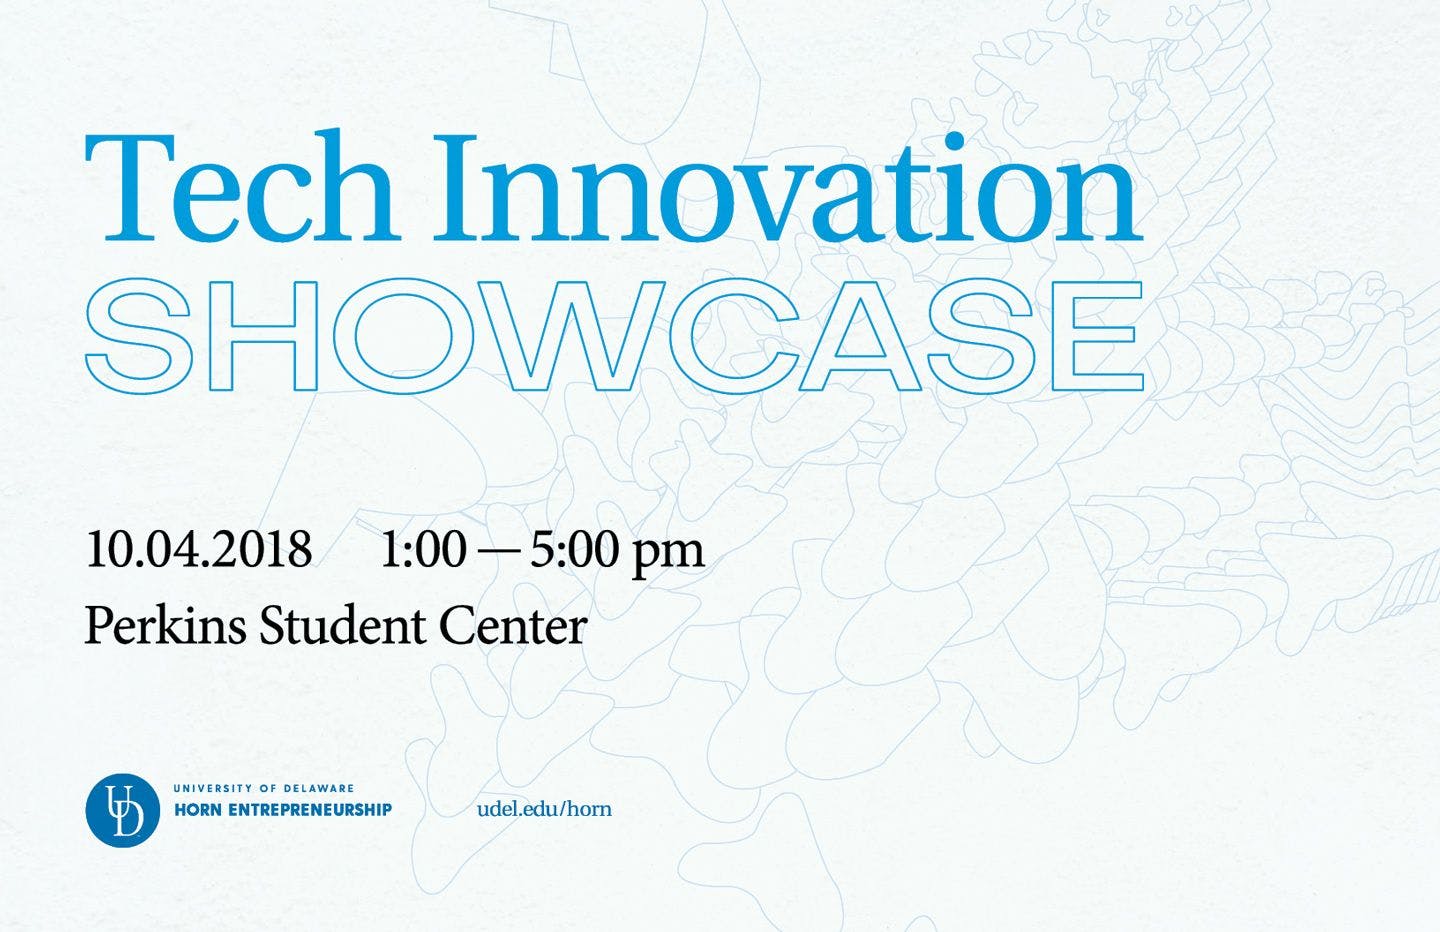 A flyer for the Tech Innovation Showcase